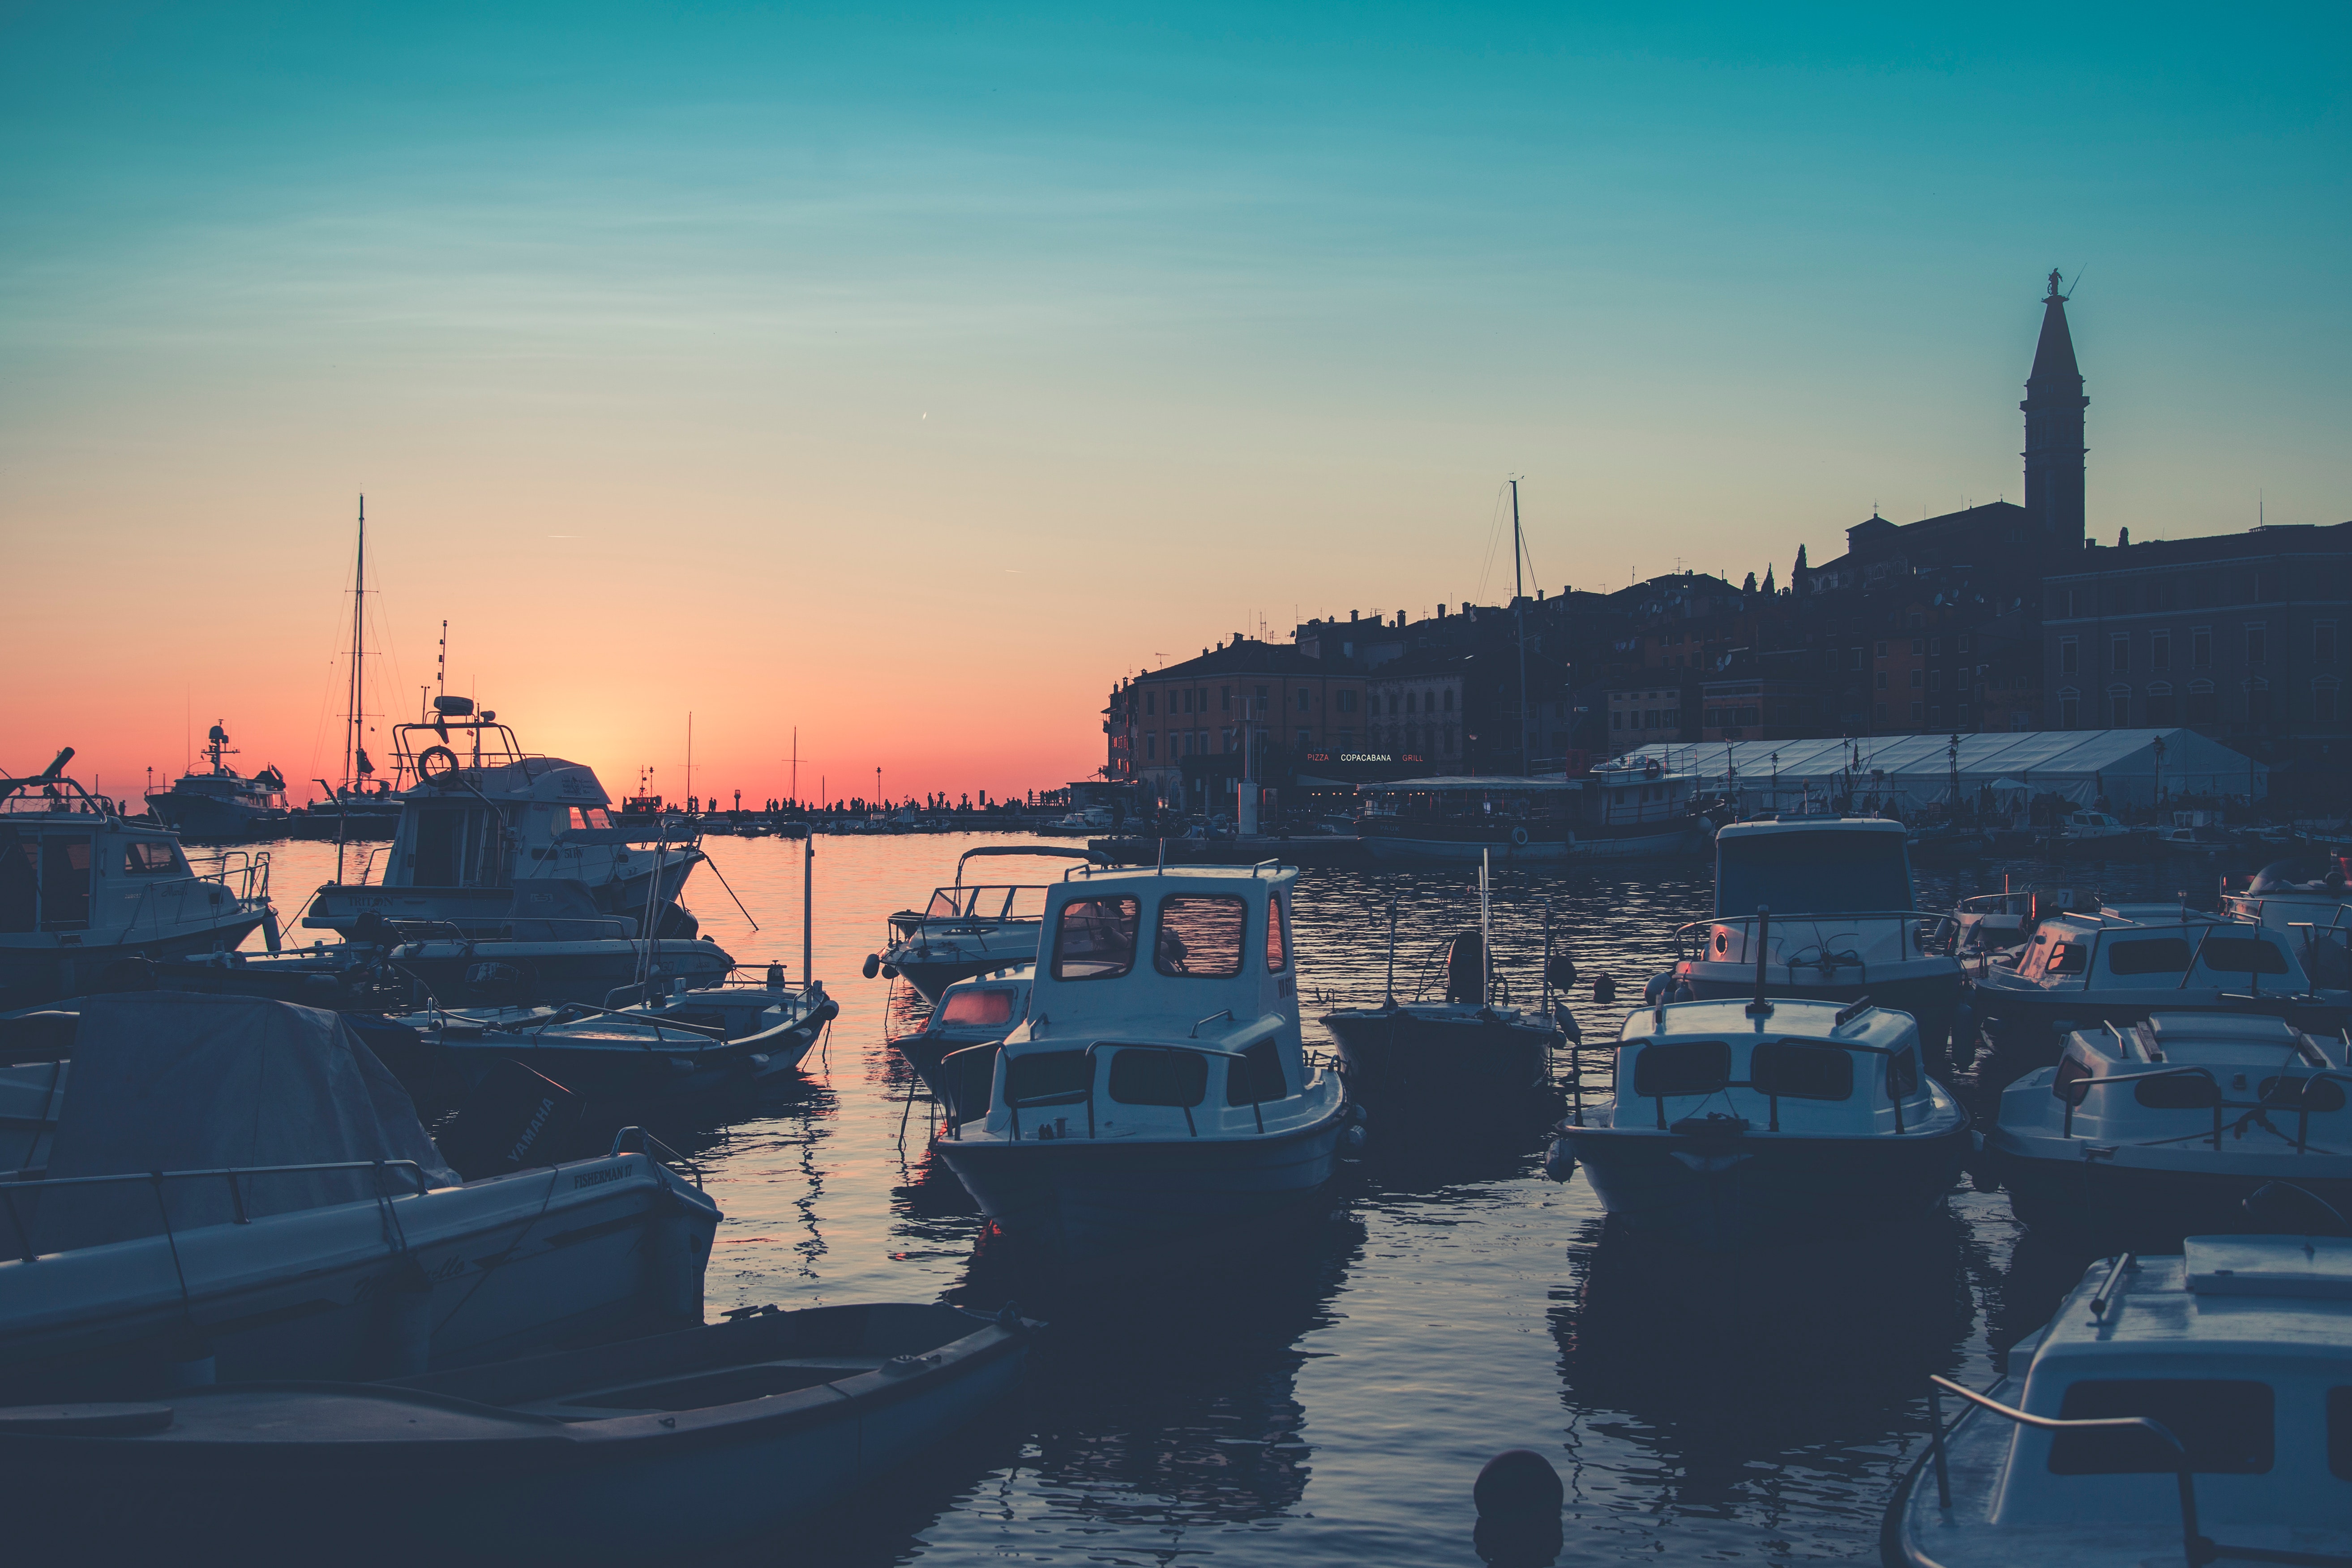 Bunch of boats on body of water during golden hour photo